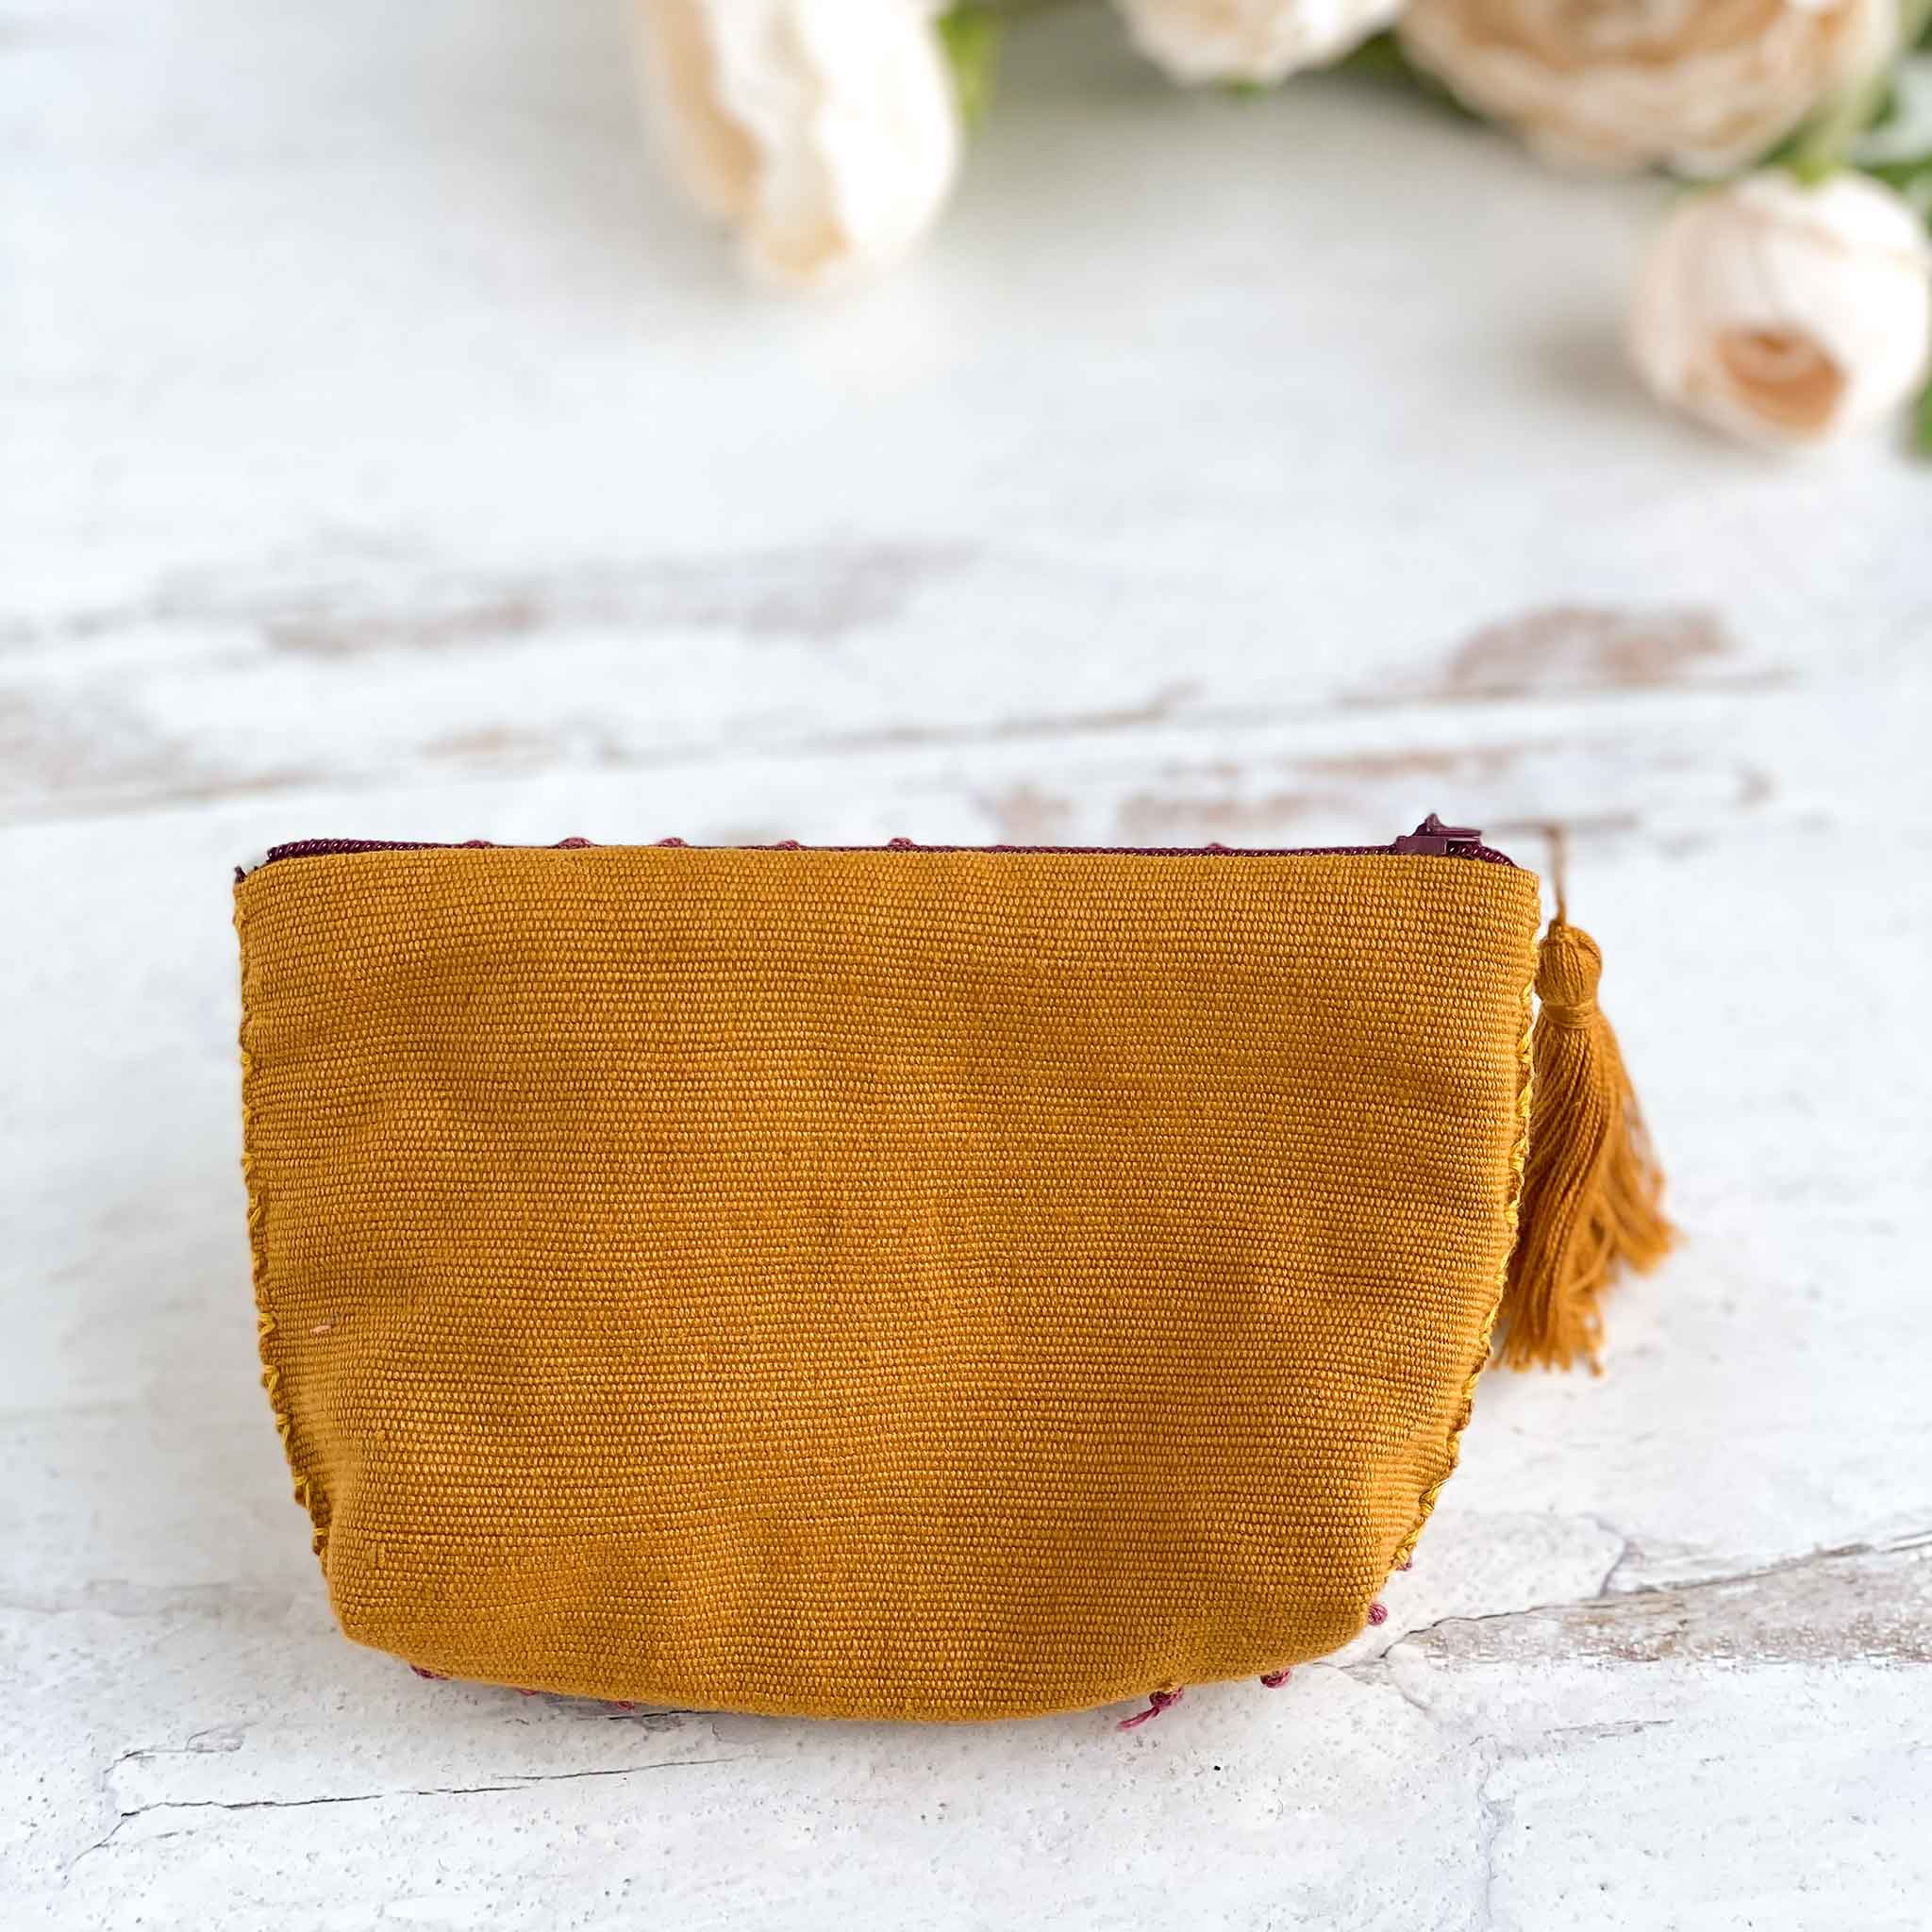 Handwoven Coin Purse with Tassel - Mustard Yellow